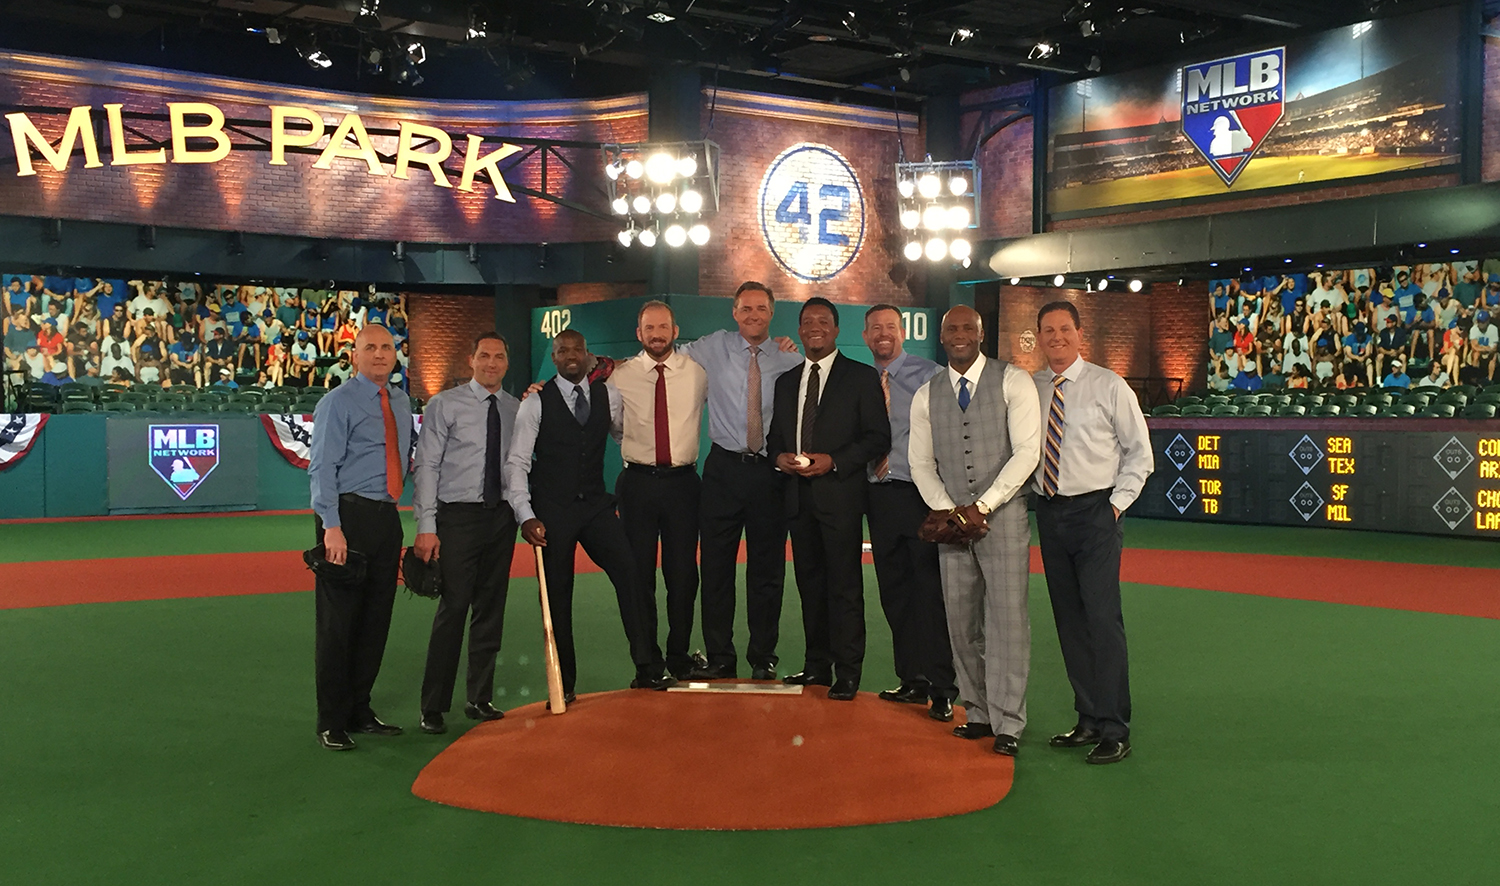 A Decade of MLB Network Baseballs Network Thrives as Secaucus Facility Continues to Grow